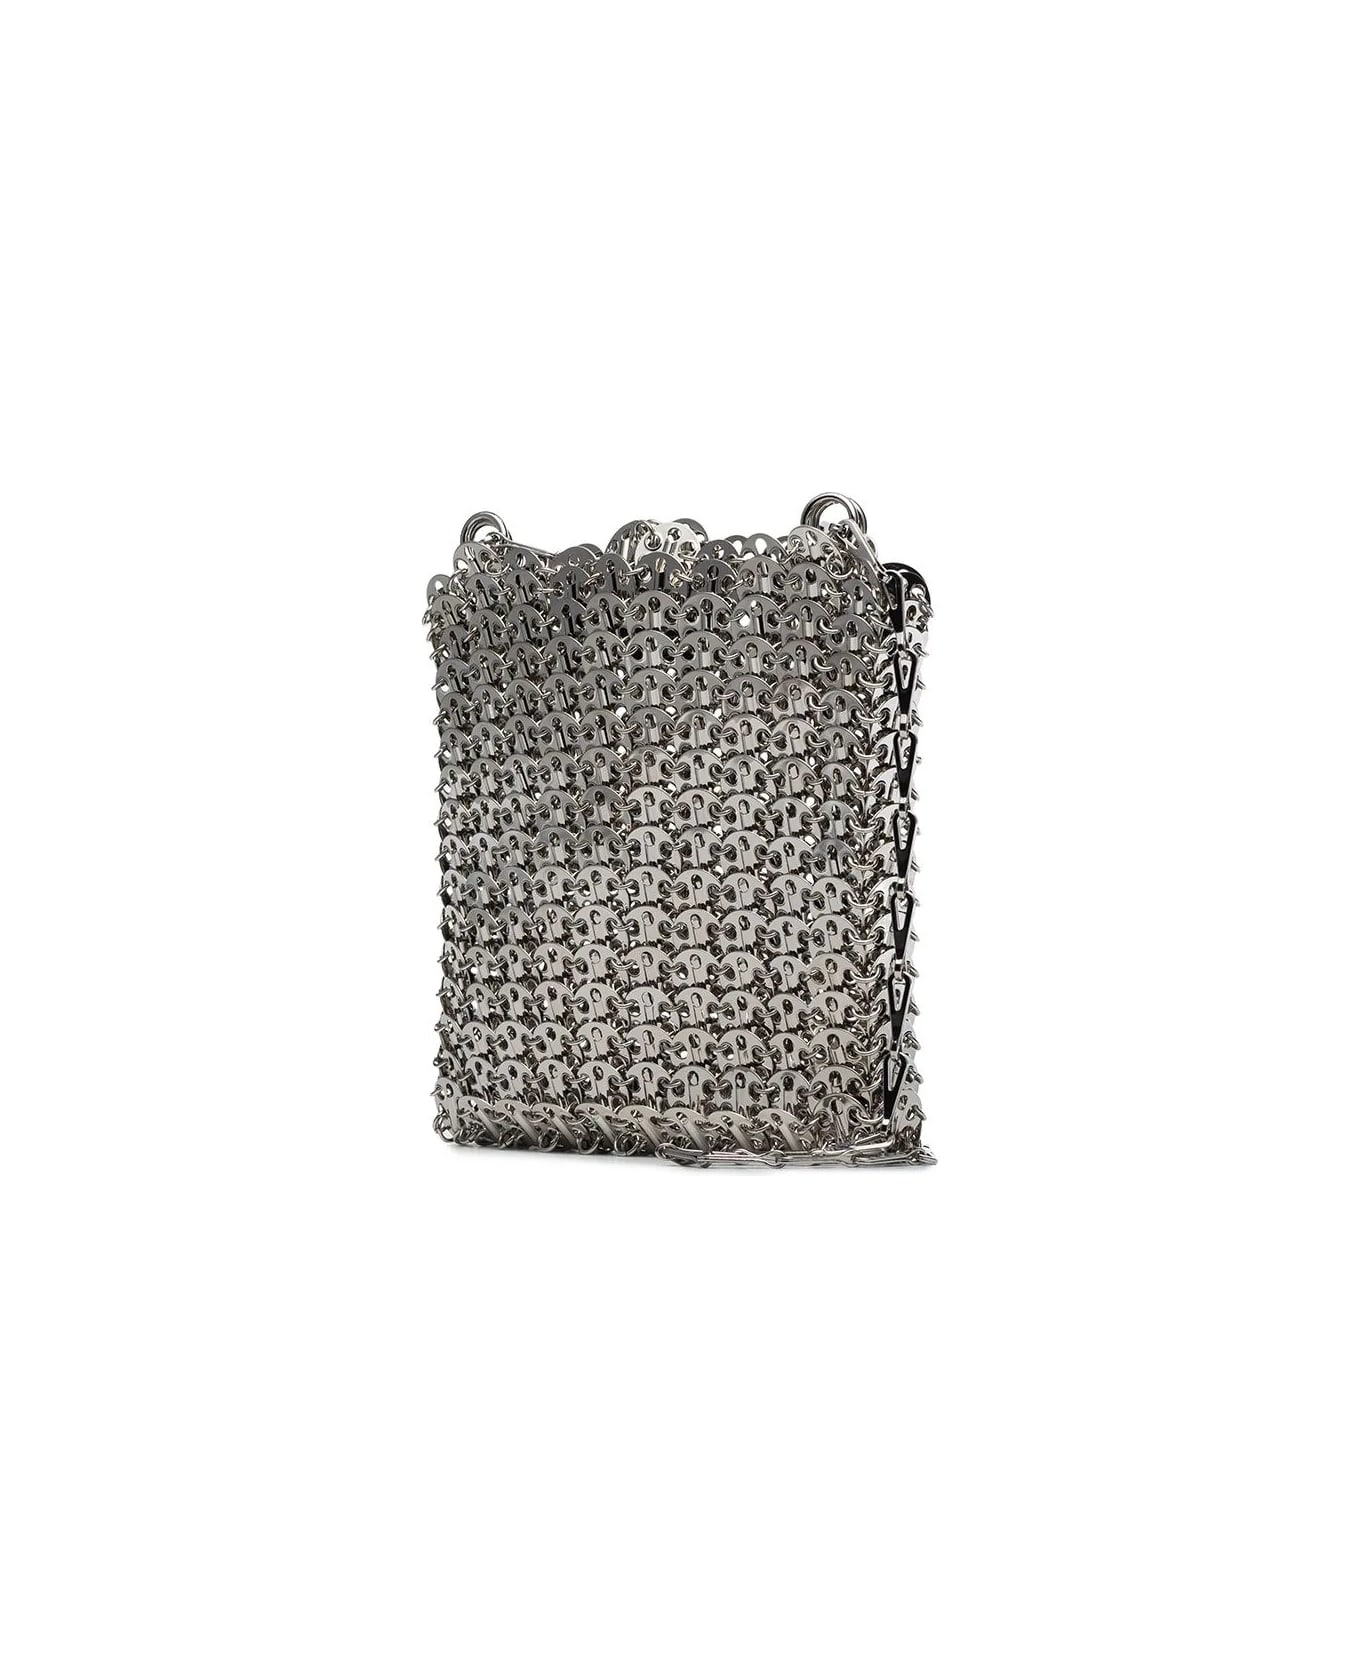 Paco Rabanne Iconic 1969 Shoulder Bag In Silver - Silver バッグ